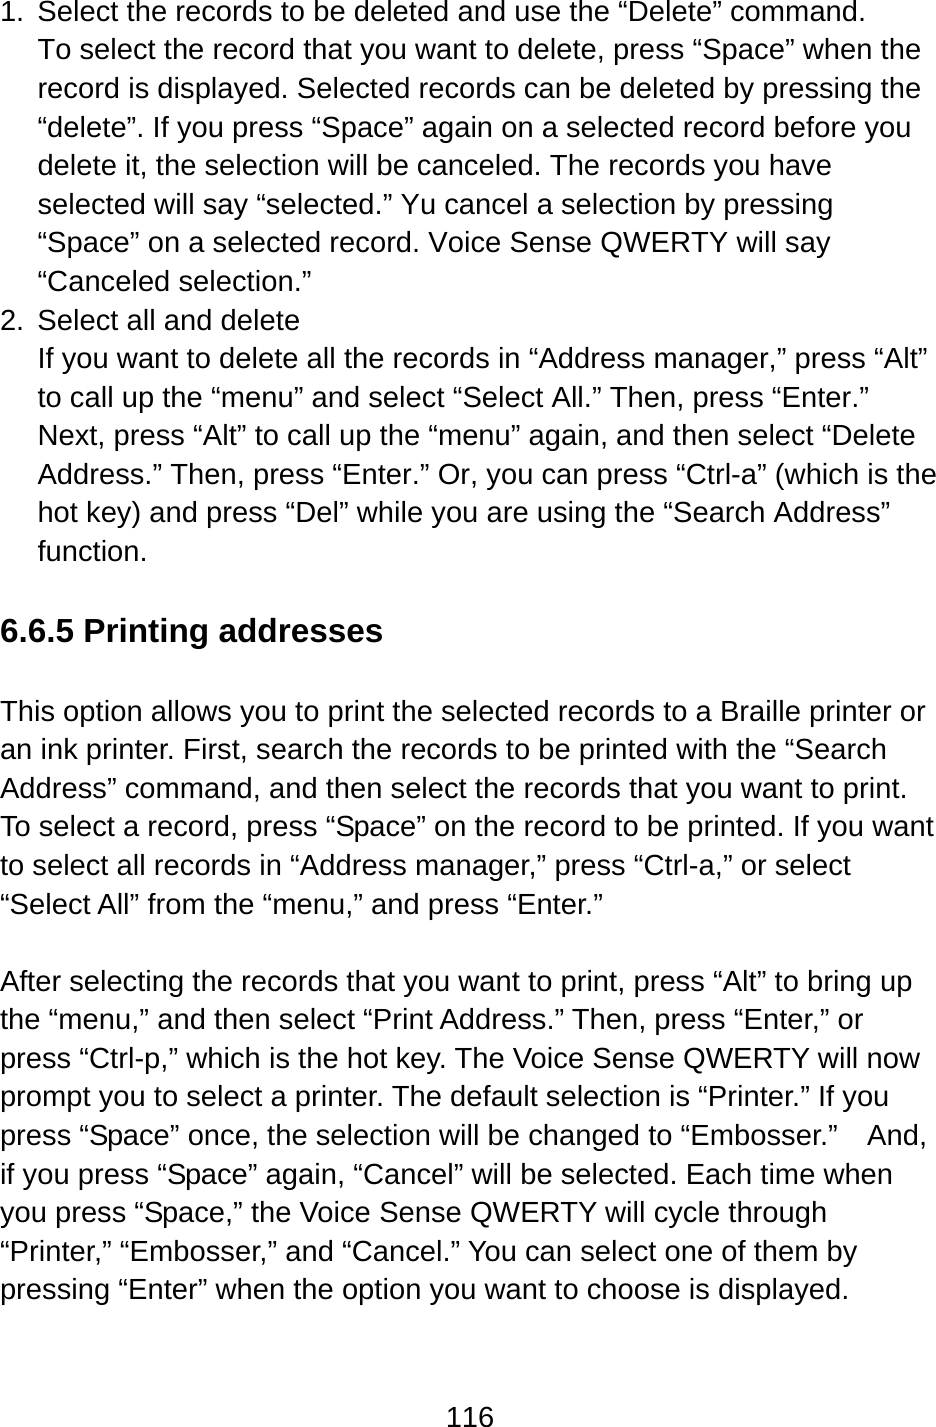 116  1.  Select the records to be deleted and use the “Delete” command. To select the record that you want to delete, press “Space” when the record is displayed. Selected records can be deleted by pressing the “delete”. If you press “Space” again on a selected record before you delete it, the selection will be canceled. The records you have selected will say “selected.” Yu cancel a selection by pressing “Space” on a selected record. Voice Sense QWERTY will say “Canceled selection.” 2.  Select all and delete If you want to delete all the records in “Address manager,” press “Alt” to call up the “menu” and select “Select All.” Then, press “Enter.”   Next, press “Alt” to call up the “menu” again, and then select “Delete Address.” Then, press “Enter.” Or, you can press “Ctrl-a” (which is the hot key) and press “Del” while you are using the “Search Address” function.   6.6.5 Printing addresses  This option allows you to print the selected records to a Braille printer or an ink printer. First, search the records to be printed with the “Search Address” command, and then select the records that you want to print.   To select a record, press “Space” on the record to be printed. If you want to select all records in “Address manager,” press “Ctrl-a,” or select “Select All” from the “menu,” and press “Enter.”    After selecting the records that you want to print, press “Alt” to bring up the “menu,” and then select “Print Address.” Then, press “Enter,” or press “Ctrl-p,” which is the hot key. The Voice Sense QWERTY will now prompt you to select a printer. The default selection is “Printer.” If you press “Space” once, the selection will be changed to “Embosser.”    And, if you press “Space” again, “Cancel” will be selected. Each time when you press “Space,” the Voice Sense QWERTY will cycle through “Printer,” “Embosser,” and “Cancel.” You can select one of them by pressing “Enter” when the option you want to choose is displayed.  